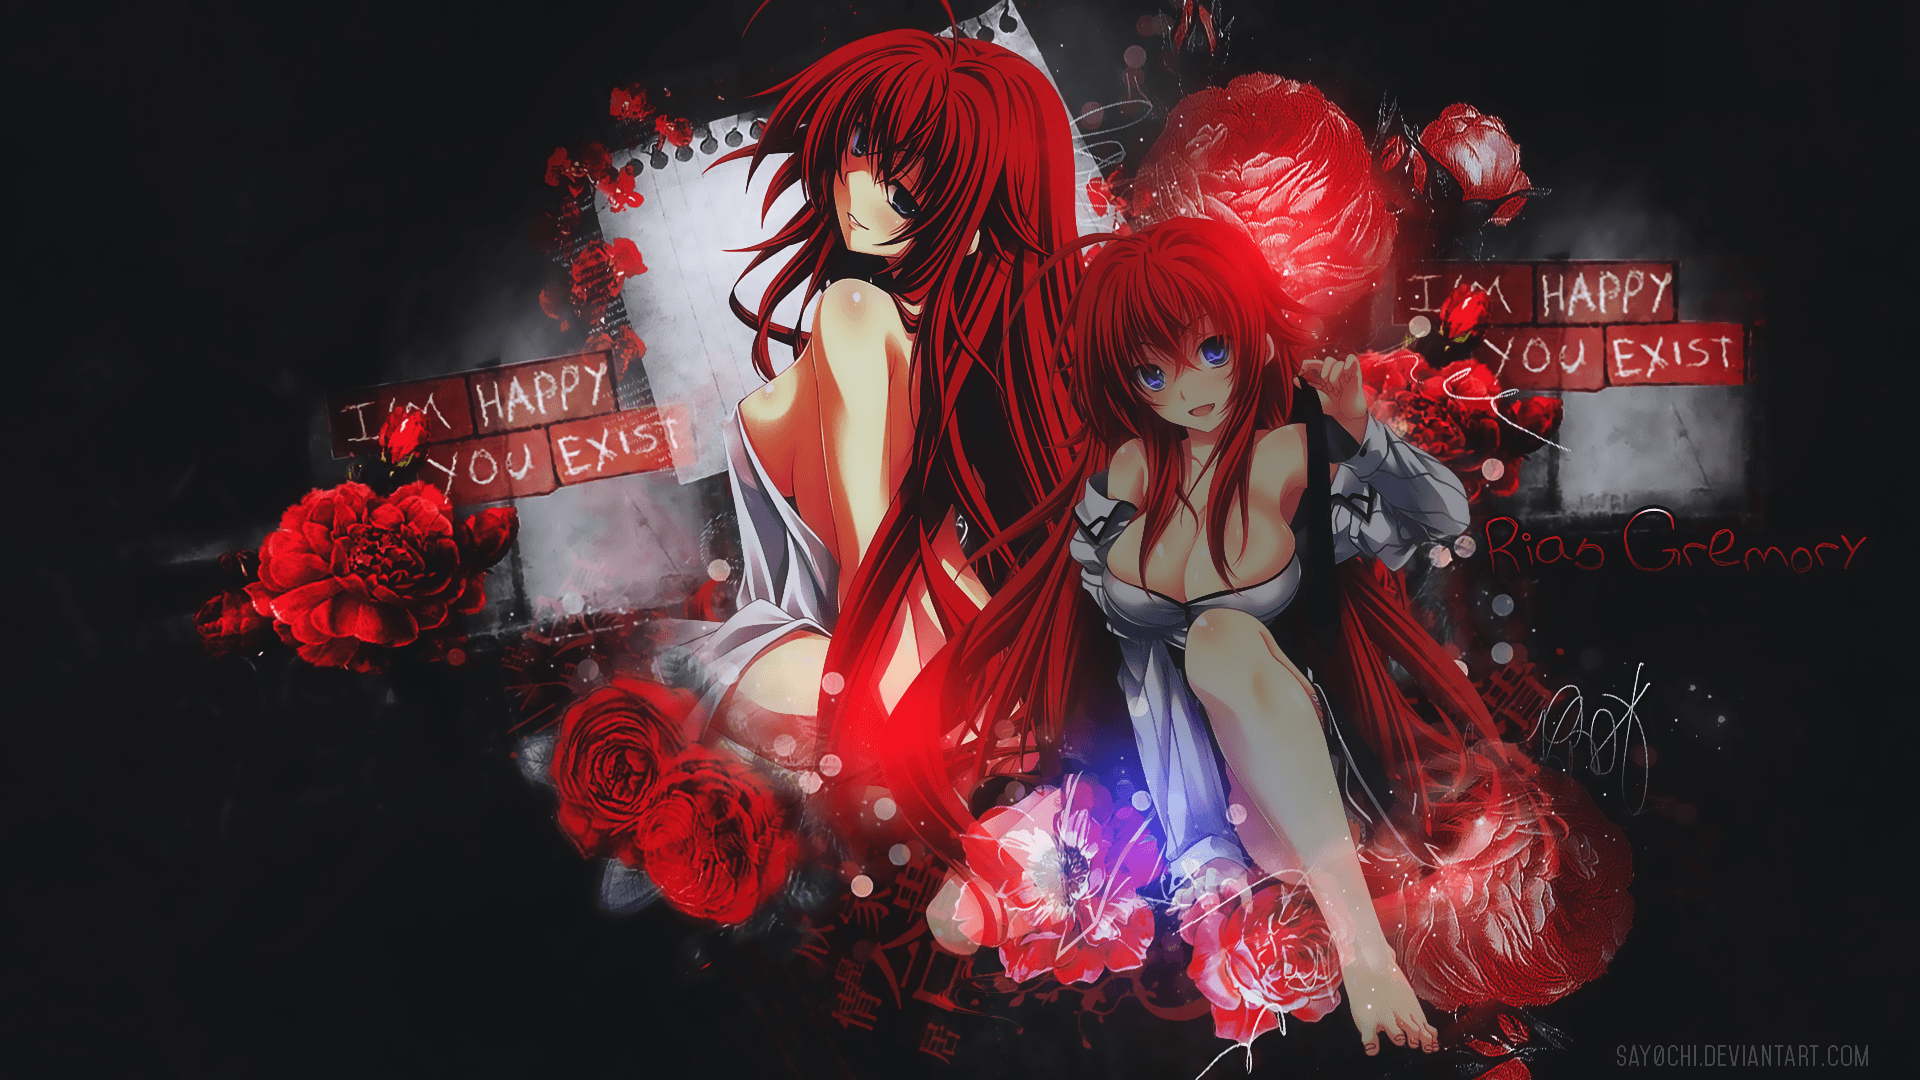 NSFW Two 1080p Rias Gremory Wallpaper I requested